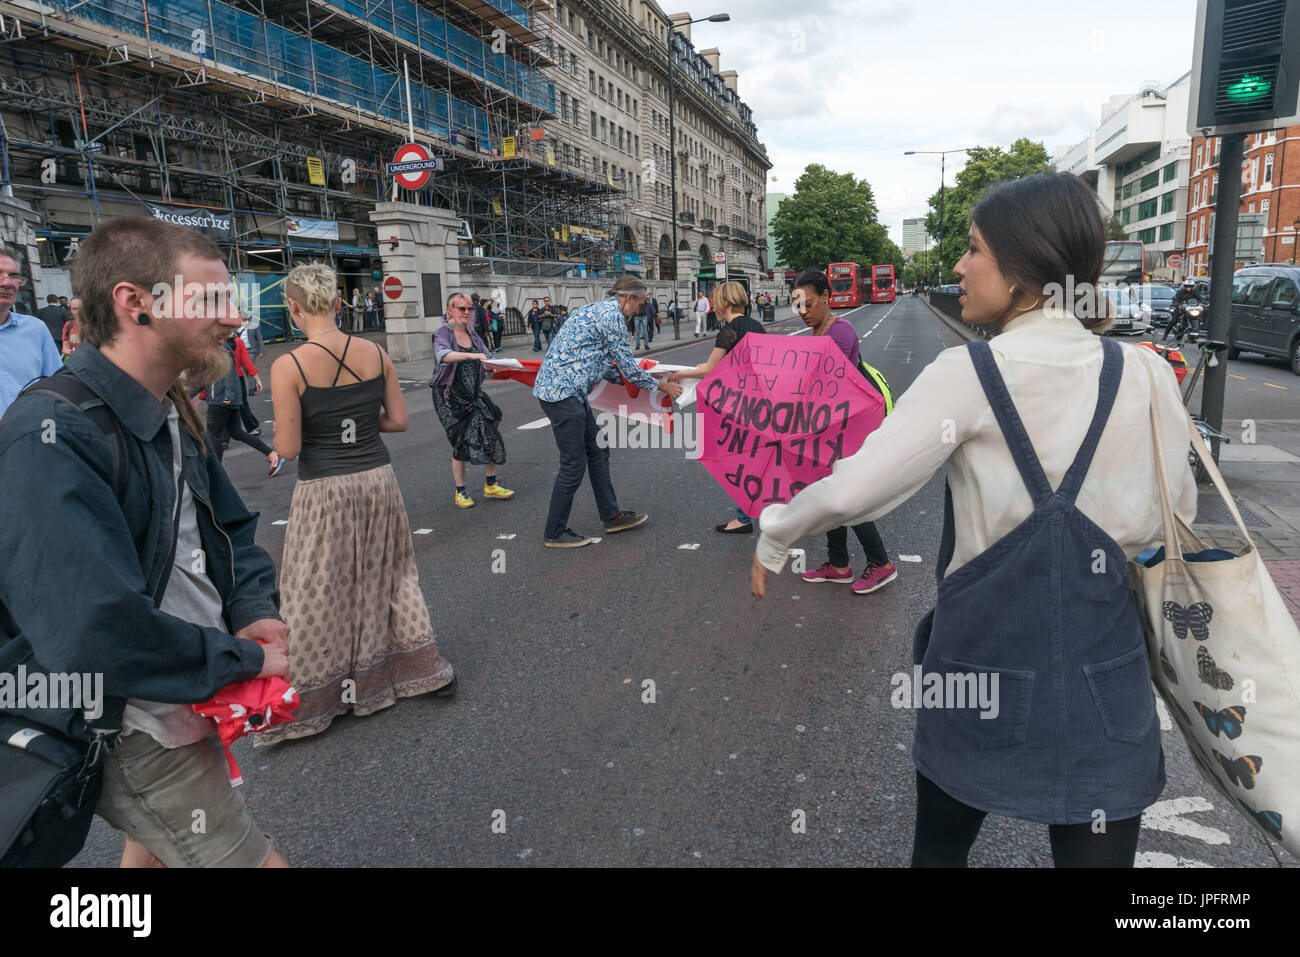 London, UK. 1st August 2017. Rising Up environmental protesters walk onto the busy Marylebone Road at Baker St for their 'Staying Alive' road-block disco protest to raise awareness and call for urgent action over the high pollution levels from traffic on London streets which cause 10,000 premature deaths each year. They walked into the road with banners and umbrellas with the message Stop Killing Londoners and sat down while a statement was read explaining why they were protesting and that it would only be a delay of 5-10 minutes, then danced in front of the blocked traffic before leaving the  Stock Photo